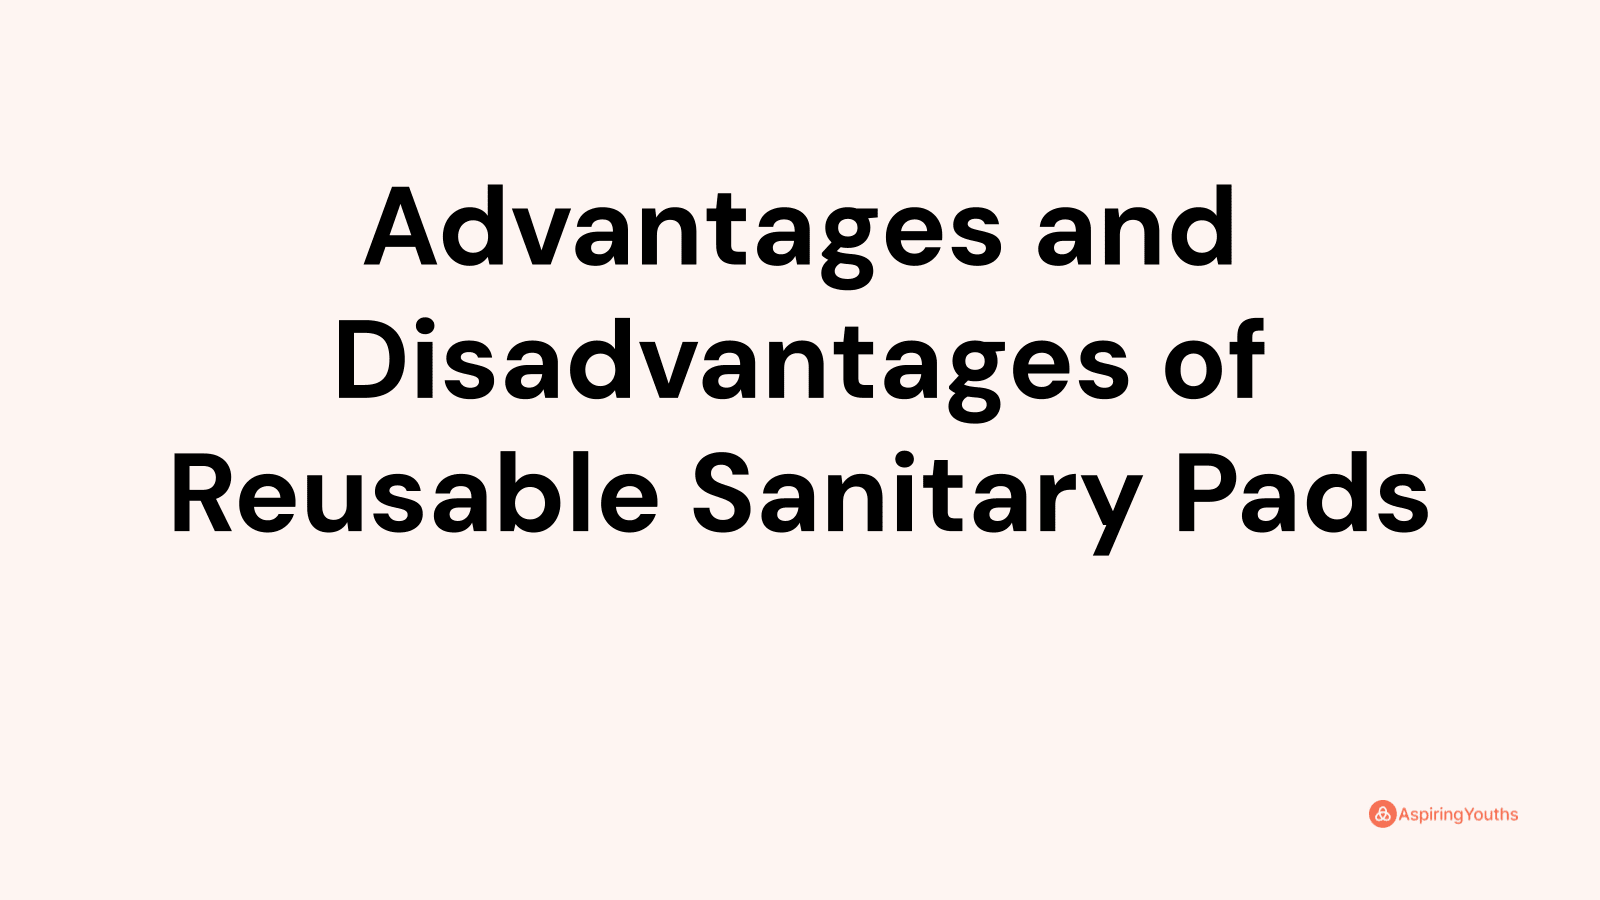 Advantages and disadvantages of Reusable Sanitary Pads